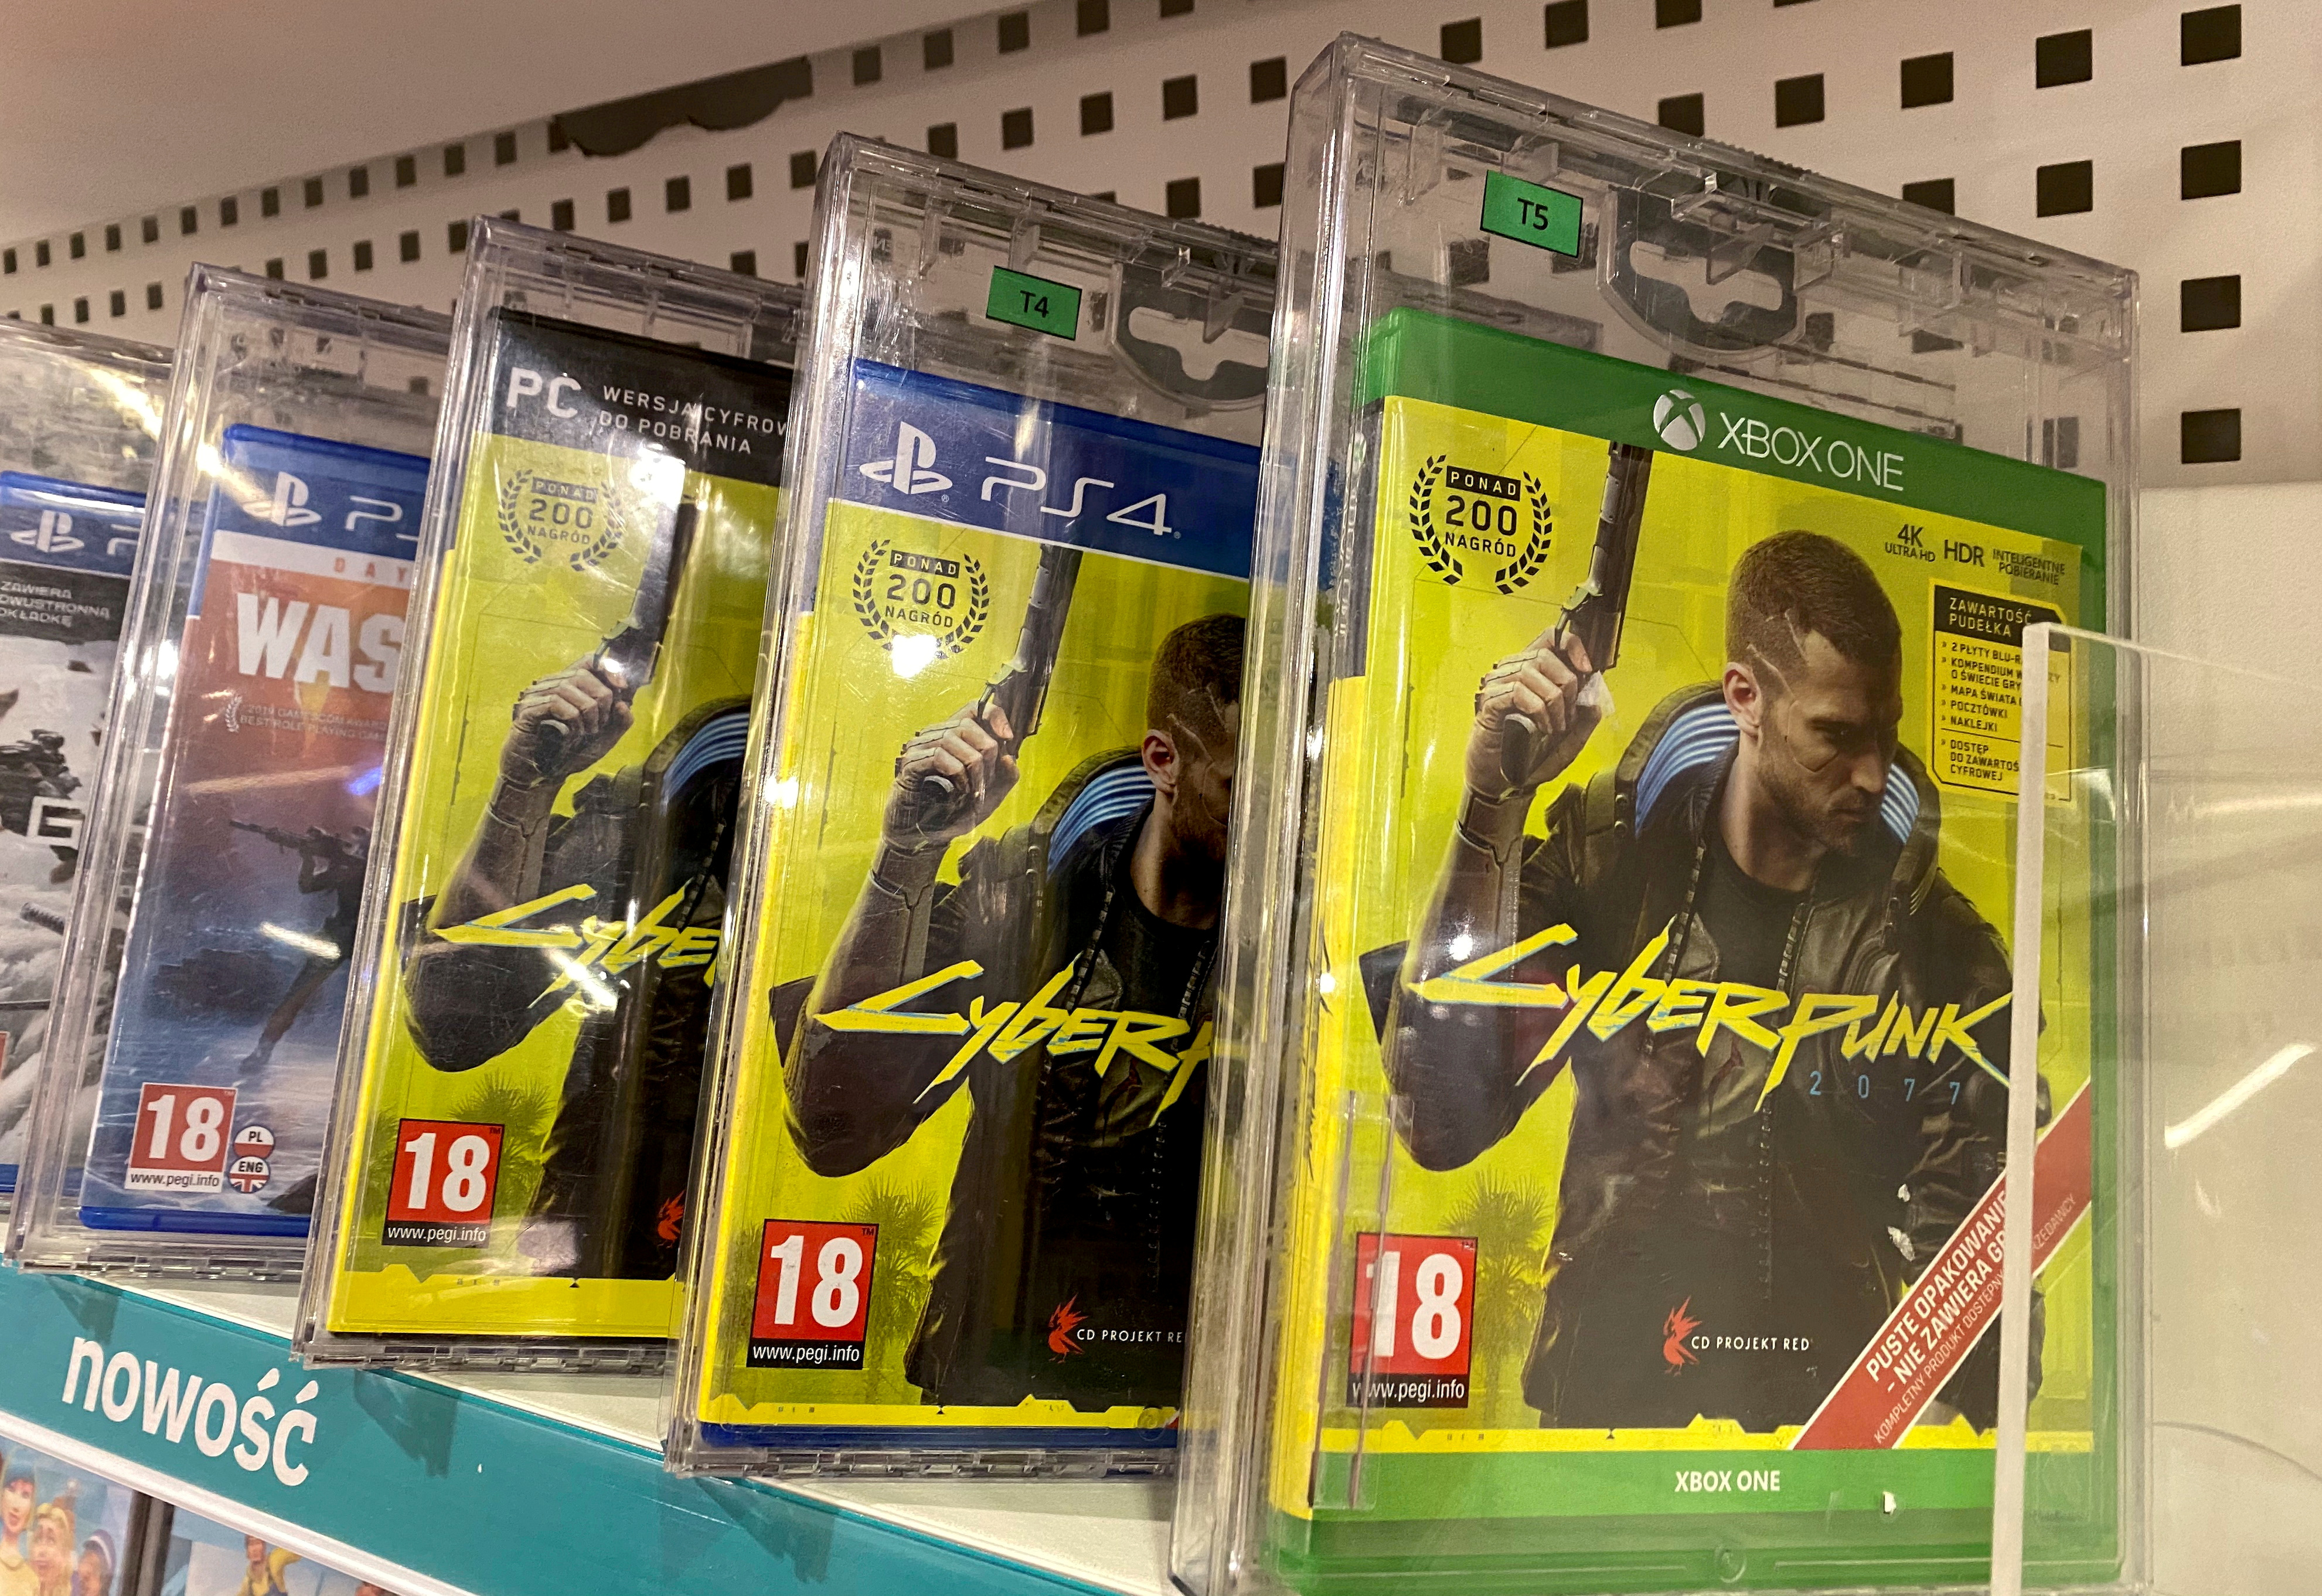 Boxes with CD Projekt's game Cyberpunk 2077 are displayed in Warsaw, Poland